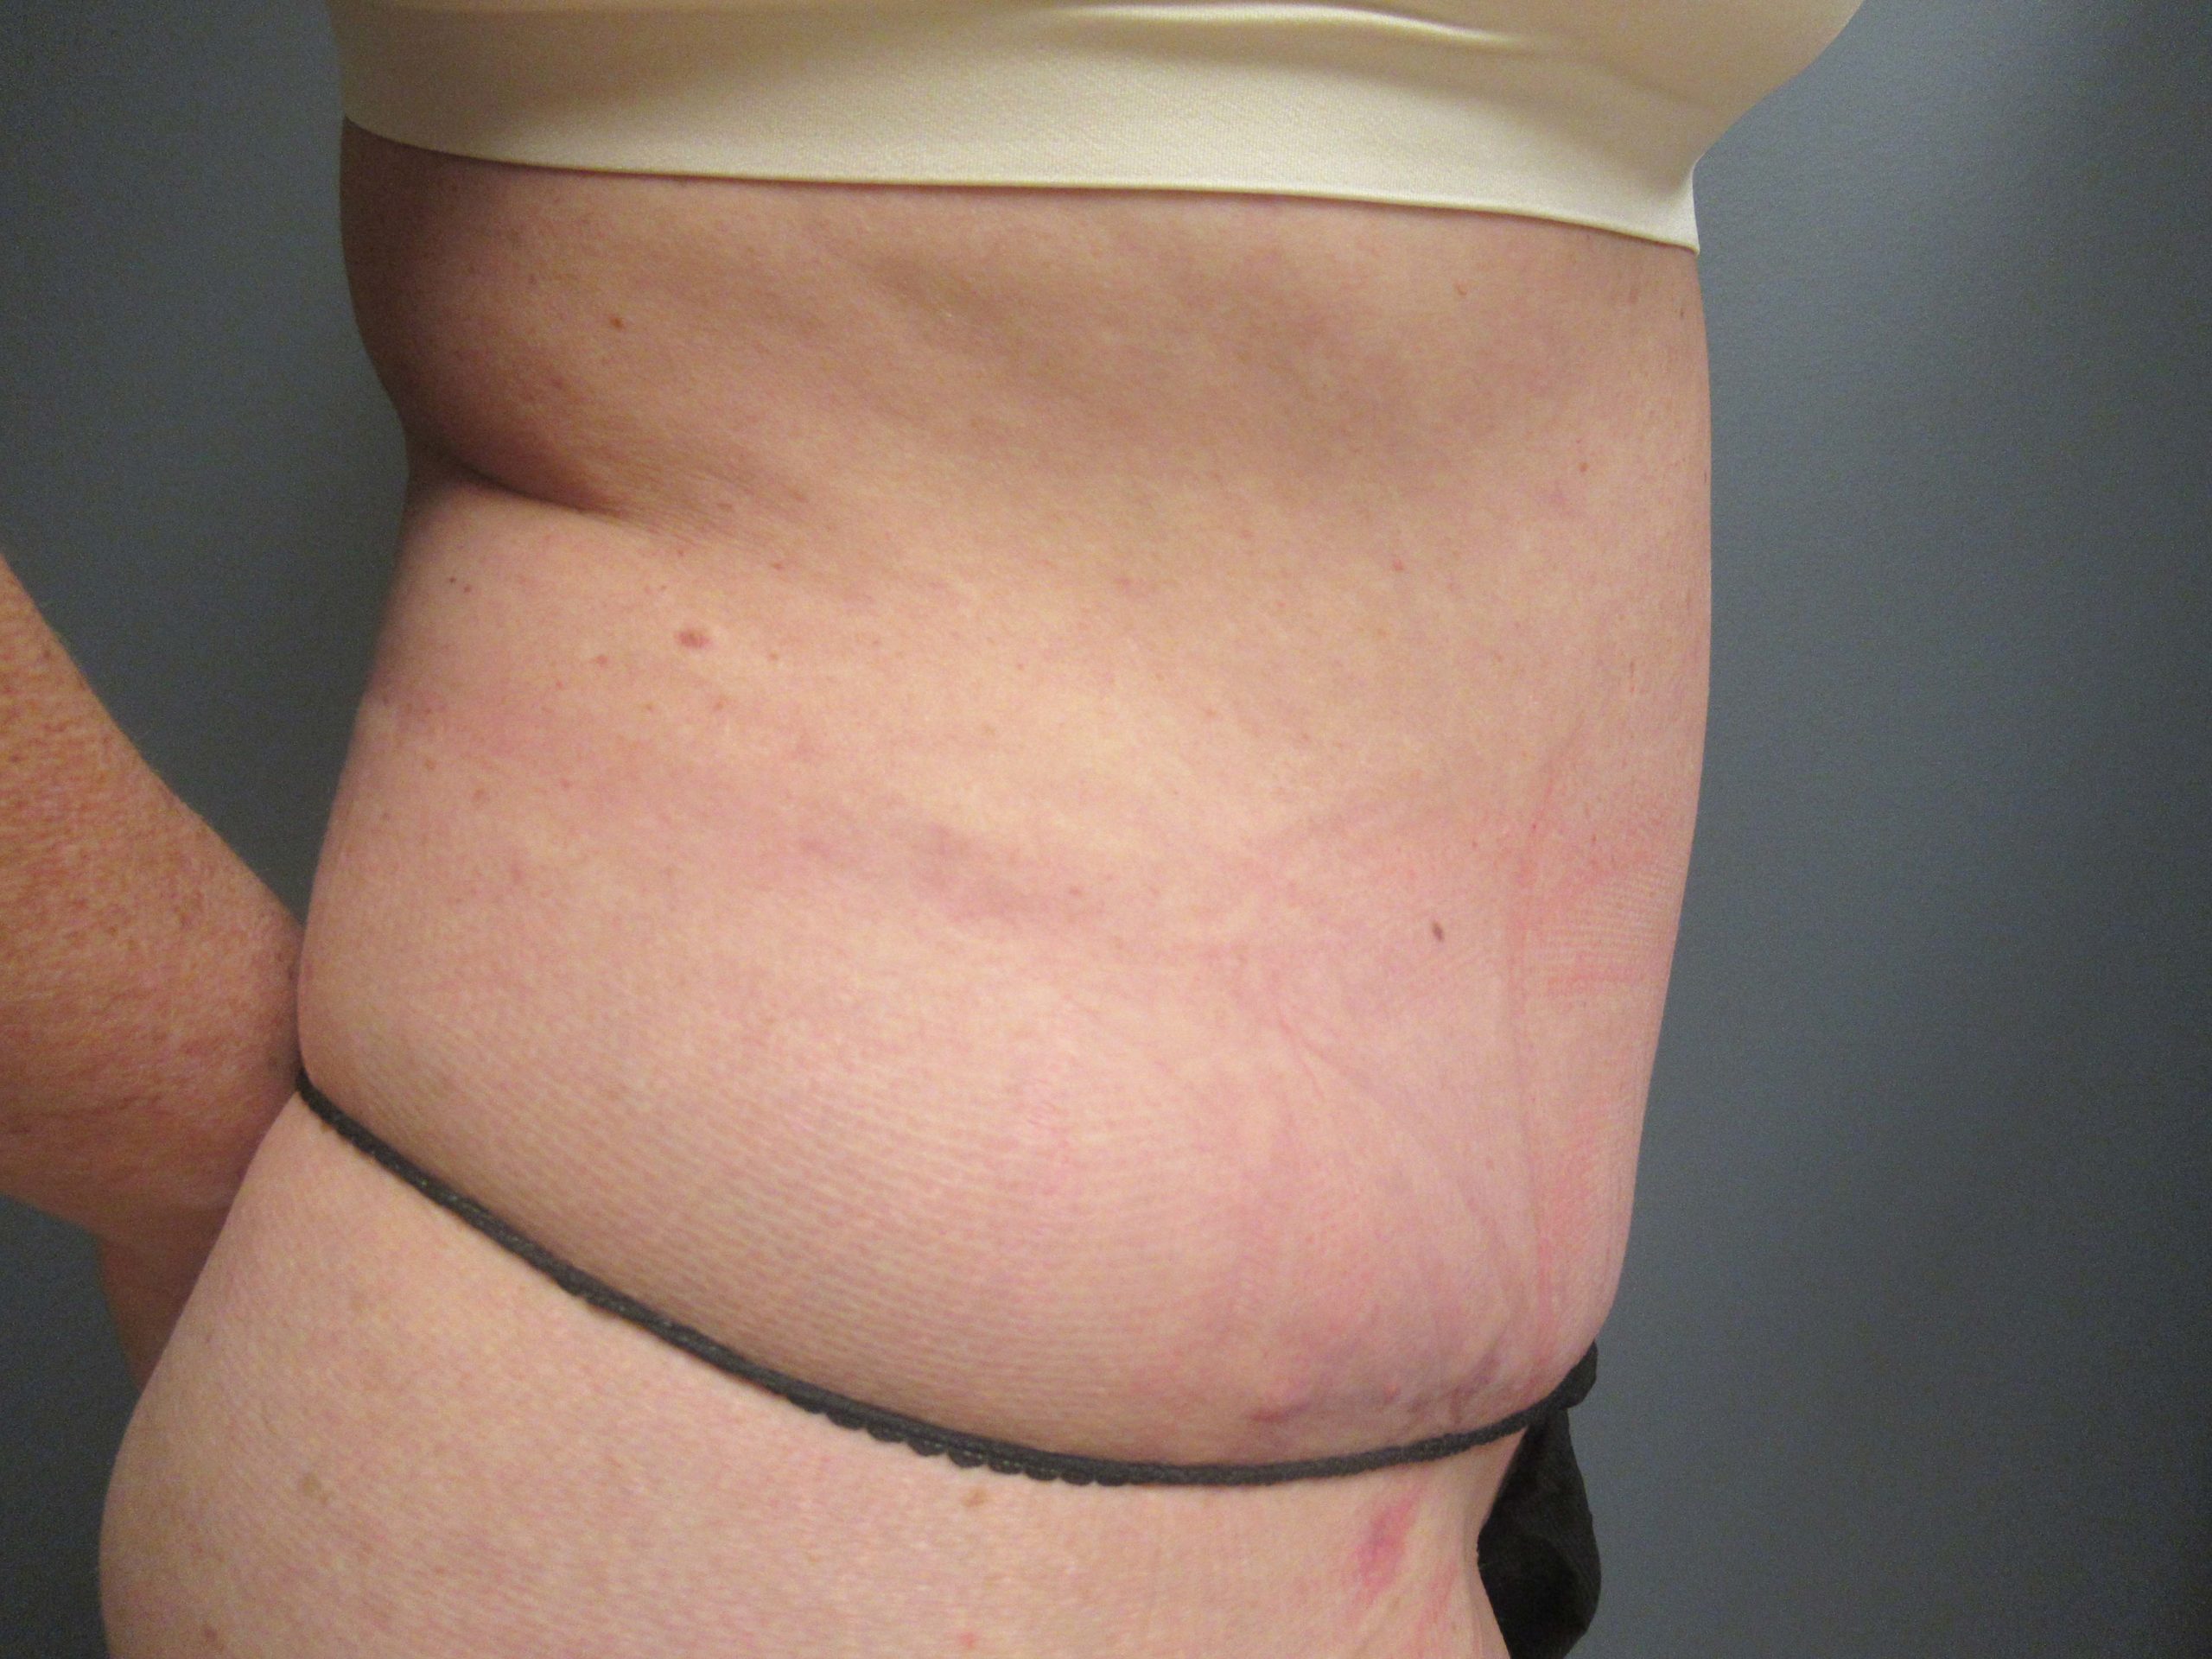 53-yr-old-female-55-209-lbs-3-months-After-Tummy-Tuck-Side